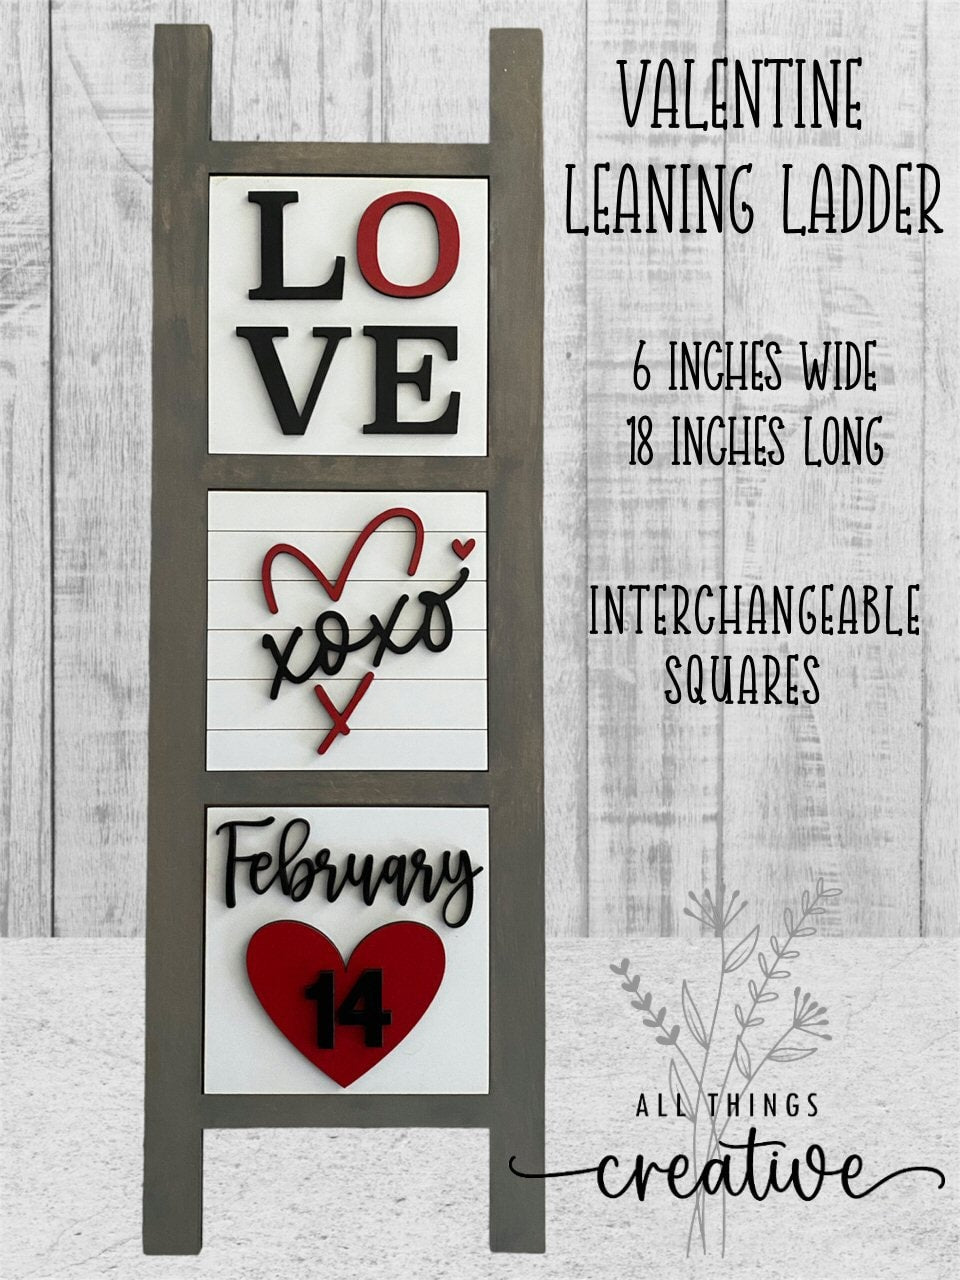 Valentine's Day Farmhouse Interchangeable Leaning Ladder with 3 Tile Inserts Holiday Home Decor